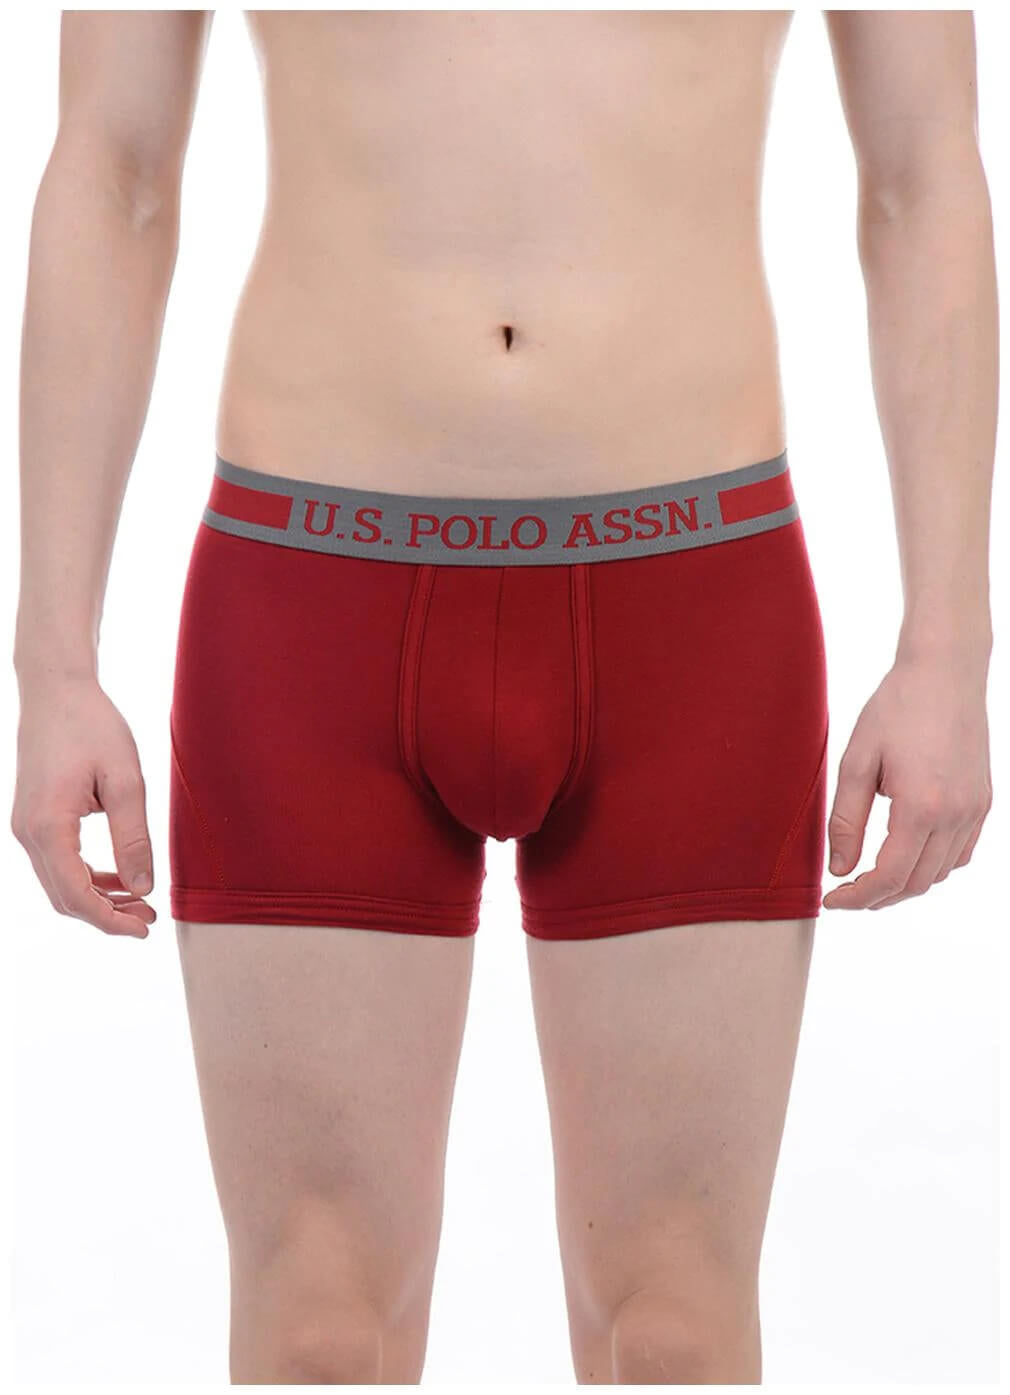 U S Polo Assn Red Trunk for Men #I101